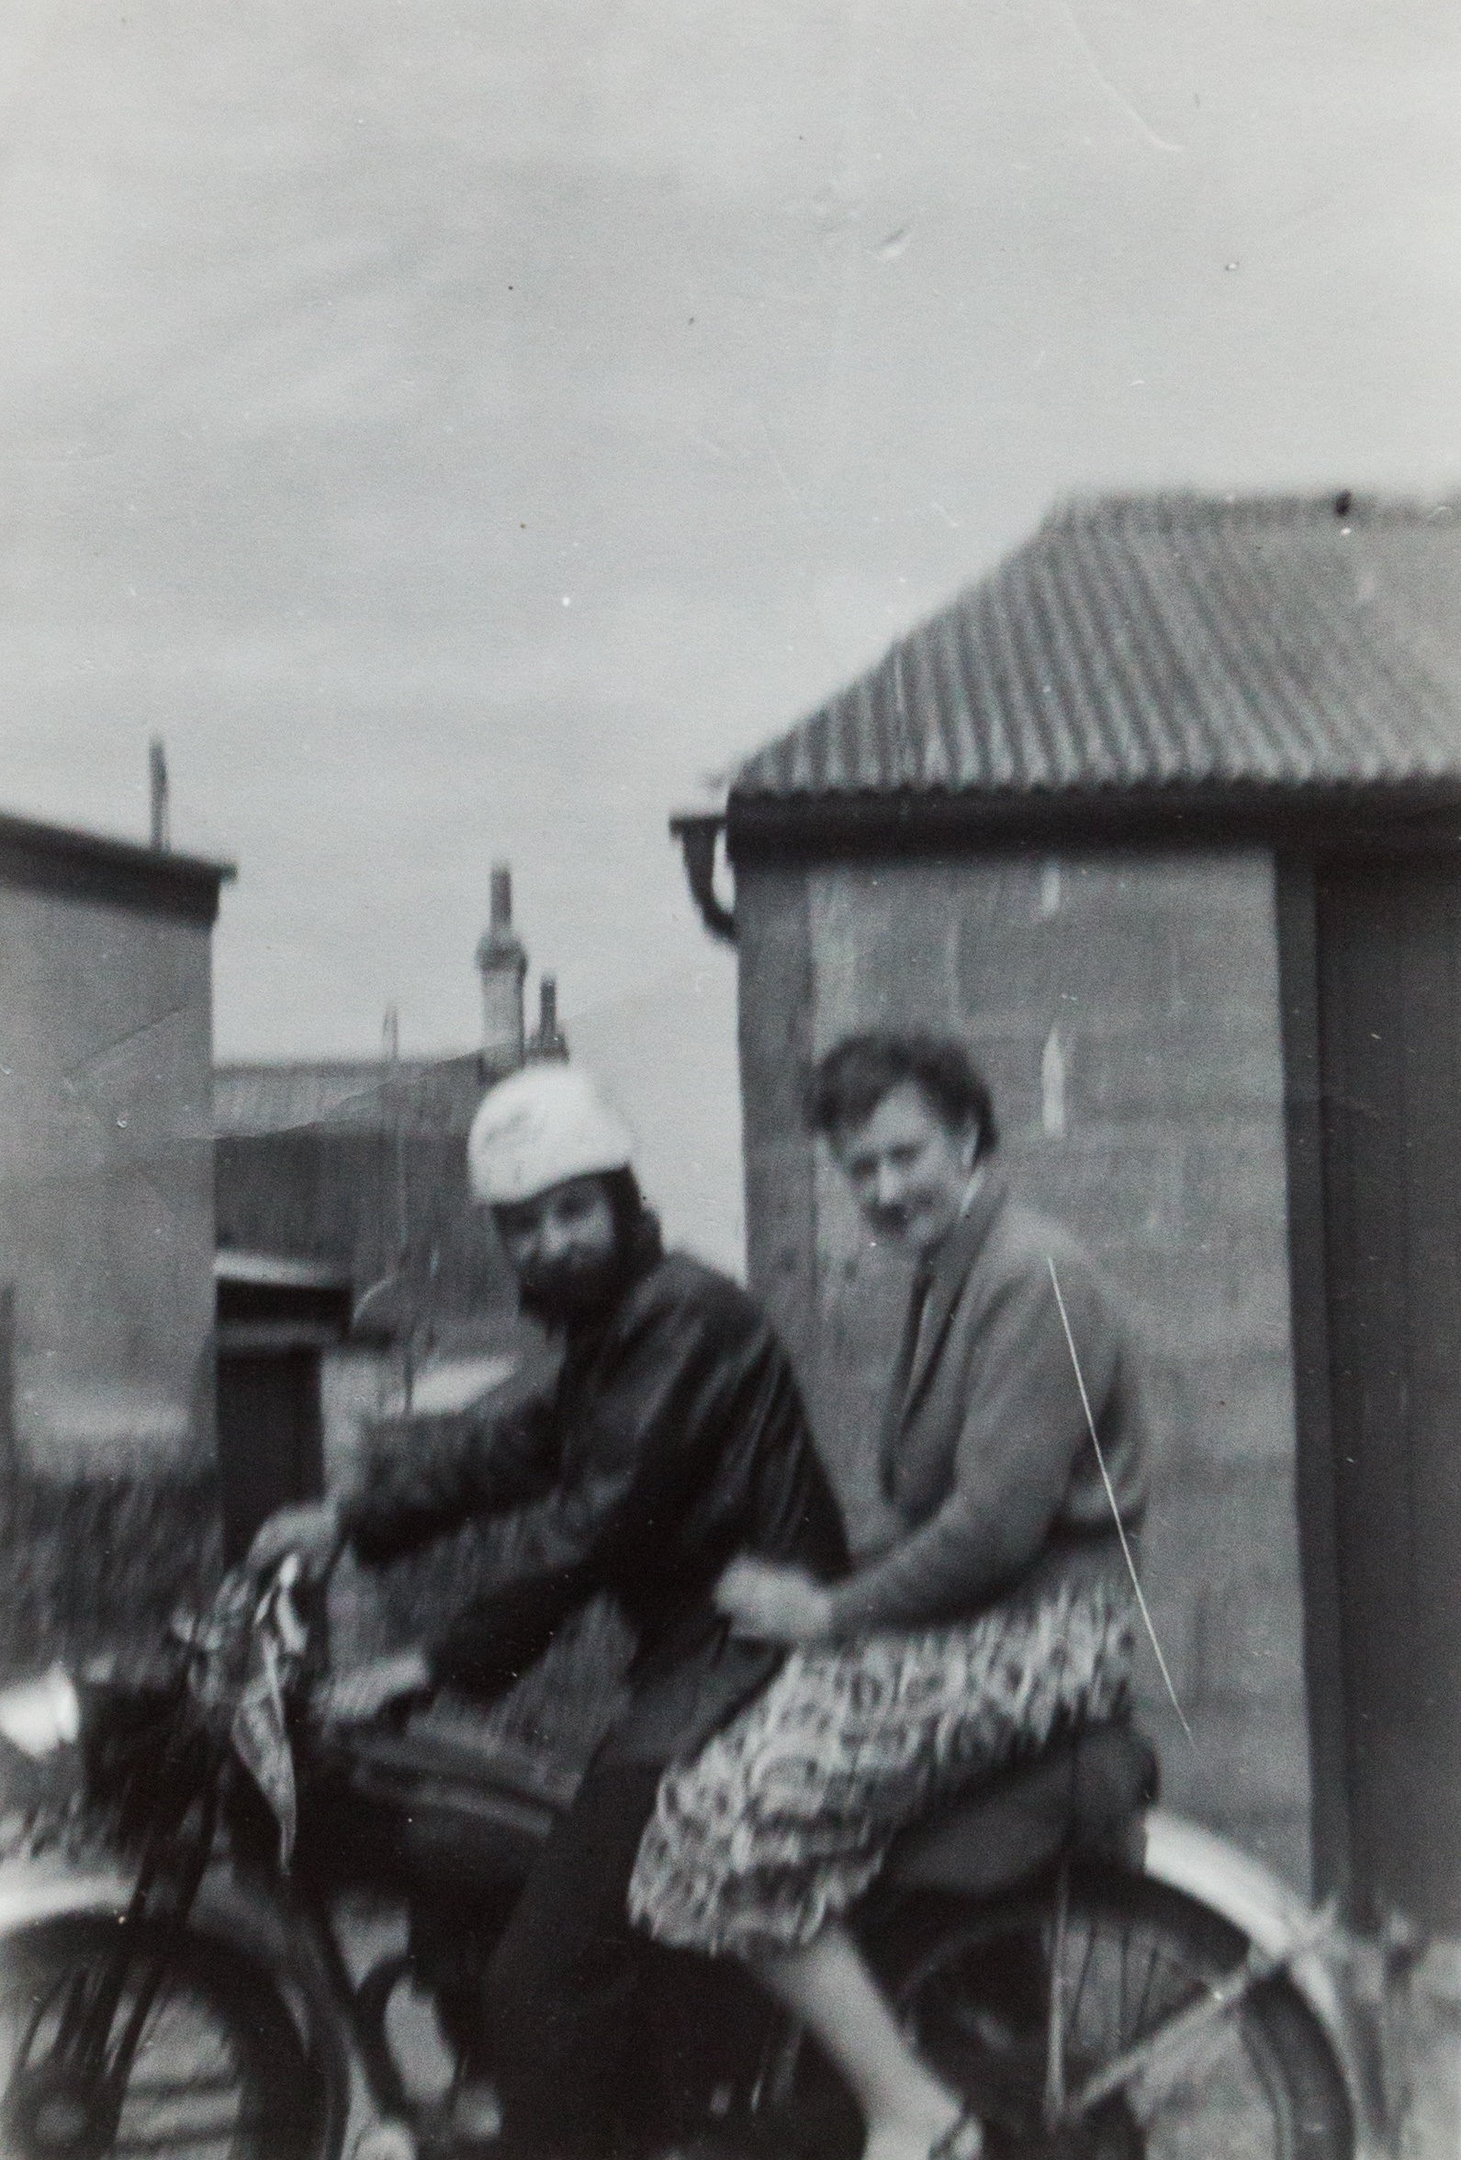 Bob and Jean Smith sitting on their motorbike in 1957 